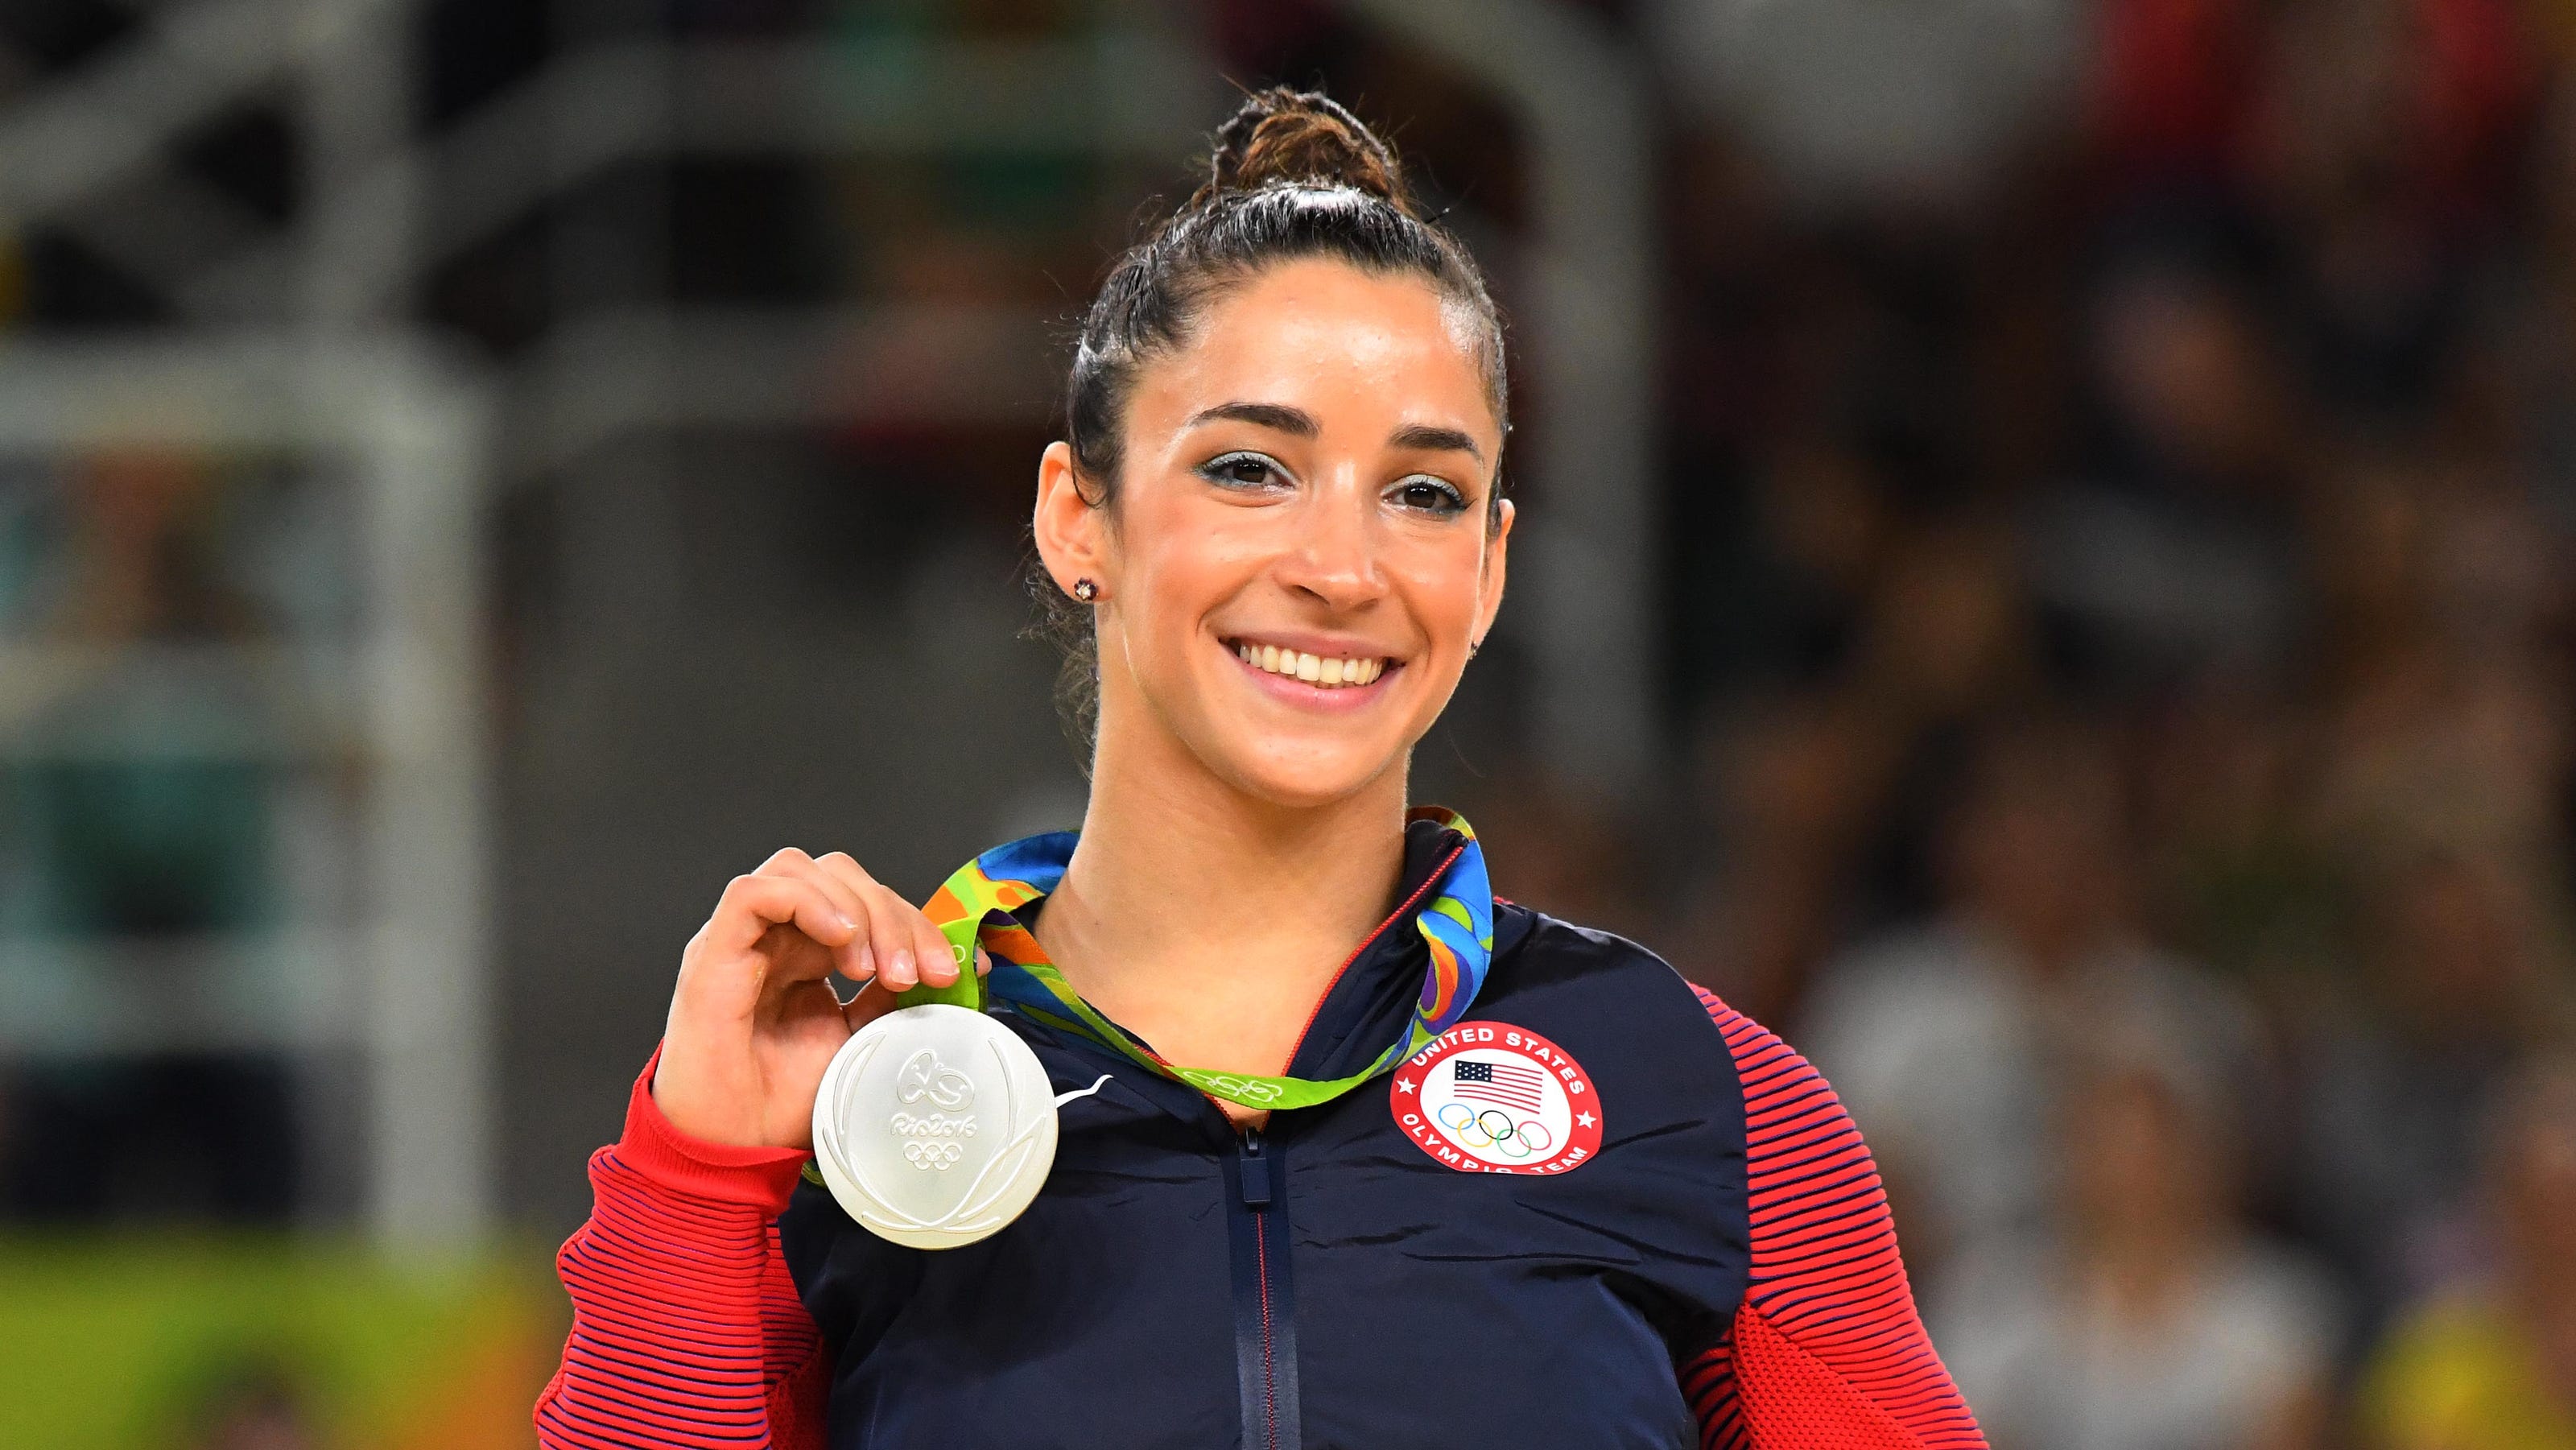 Aly Raisman survived Larry Nassar's abuse, won gold and then retired